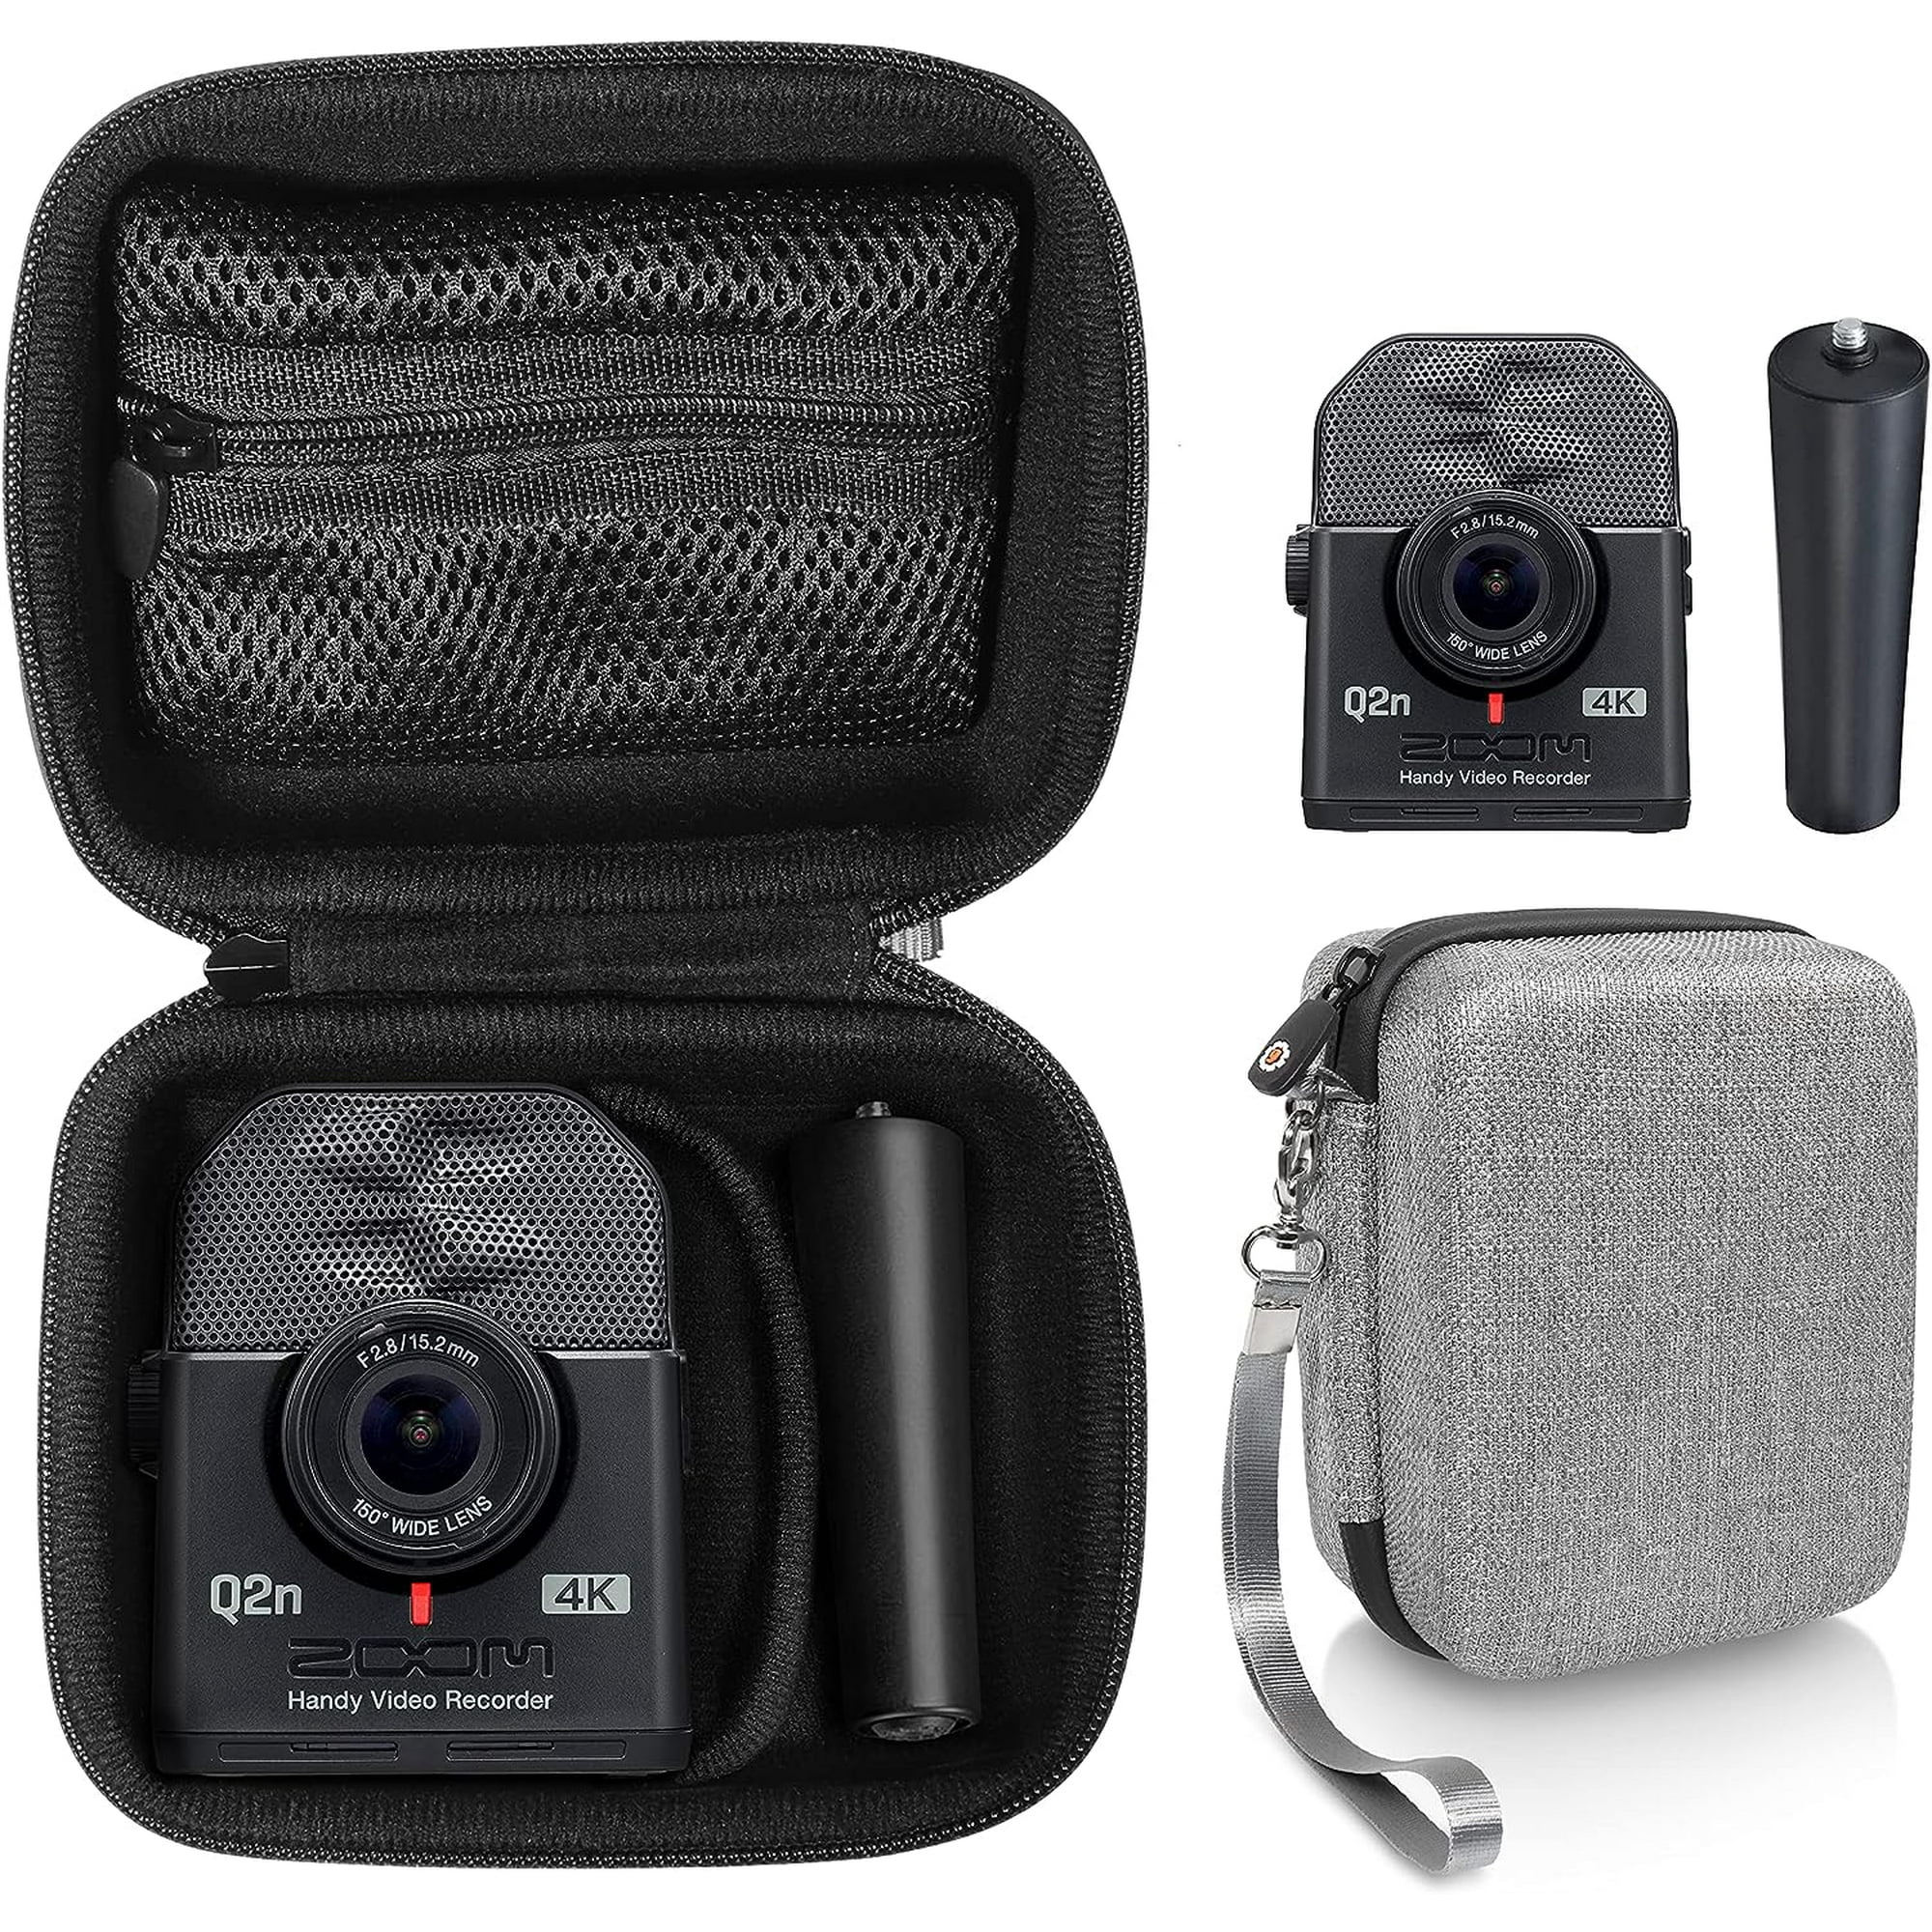 Case for Zoom Q2n-4K Handy Video Recorder and Zoom MA-2 Tripod